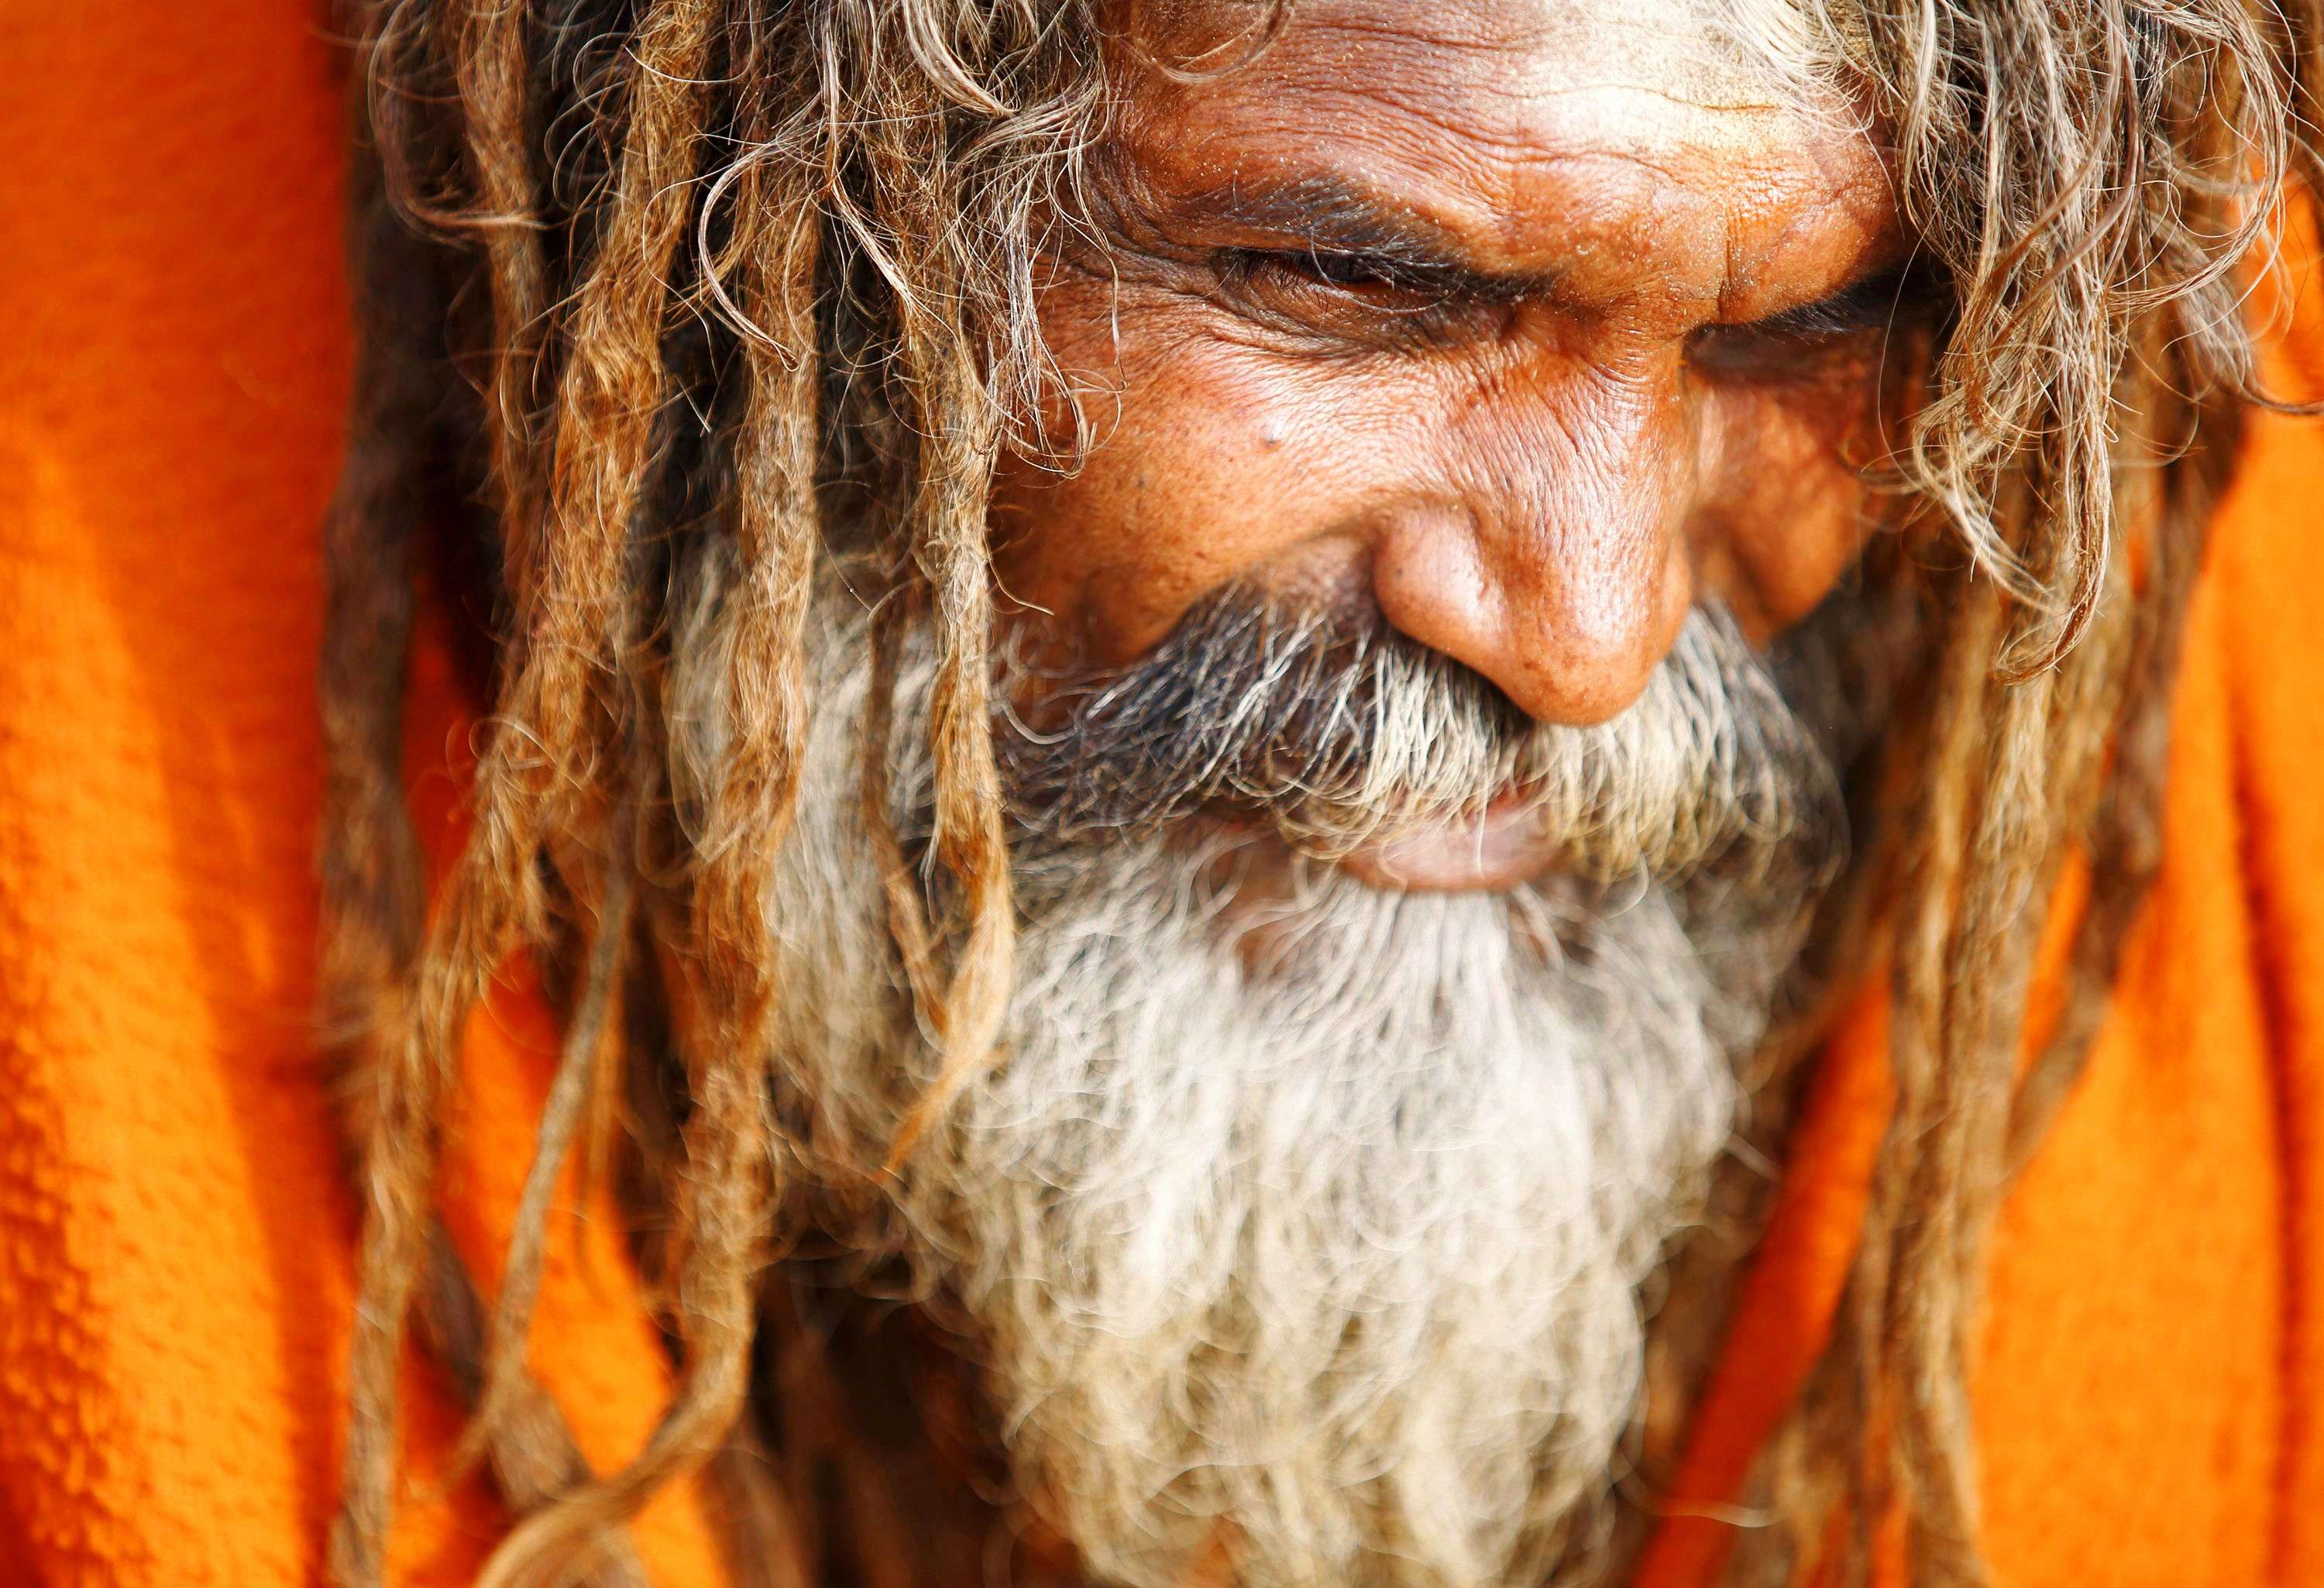 A sadhu is pictured as he sits inside the premises of Pashupatinath Temple in Kathmandu. (REUTERS/Navesh Chitrakar)